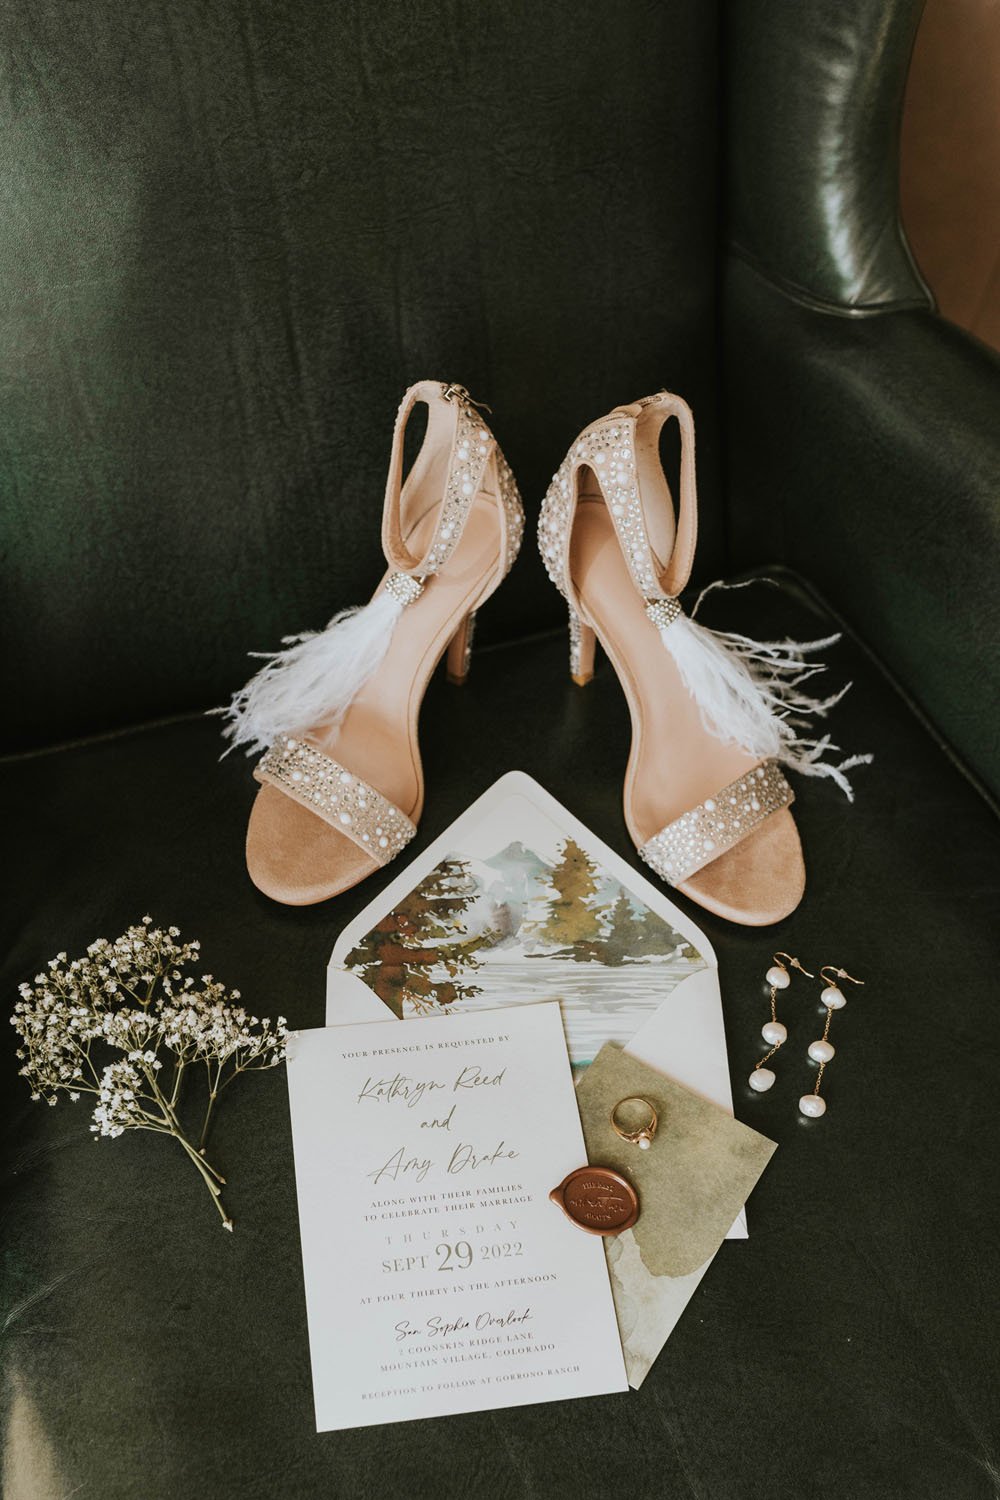  lovely blush bridal shoes with feather ankle ties, sparkle toe straps styled along side a rustic modern wedding invitation for kathryn and amy’s wedding featuring their watercolor mountain illustration envelope liner 